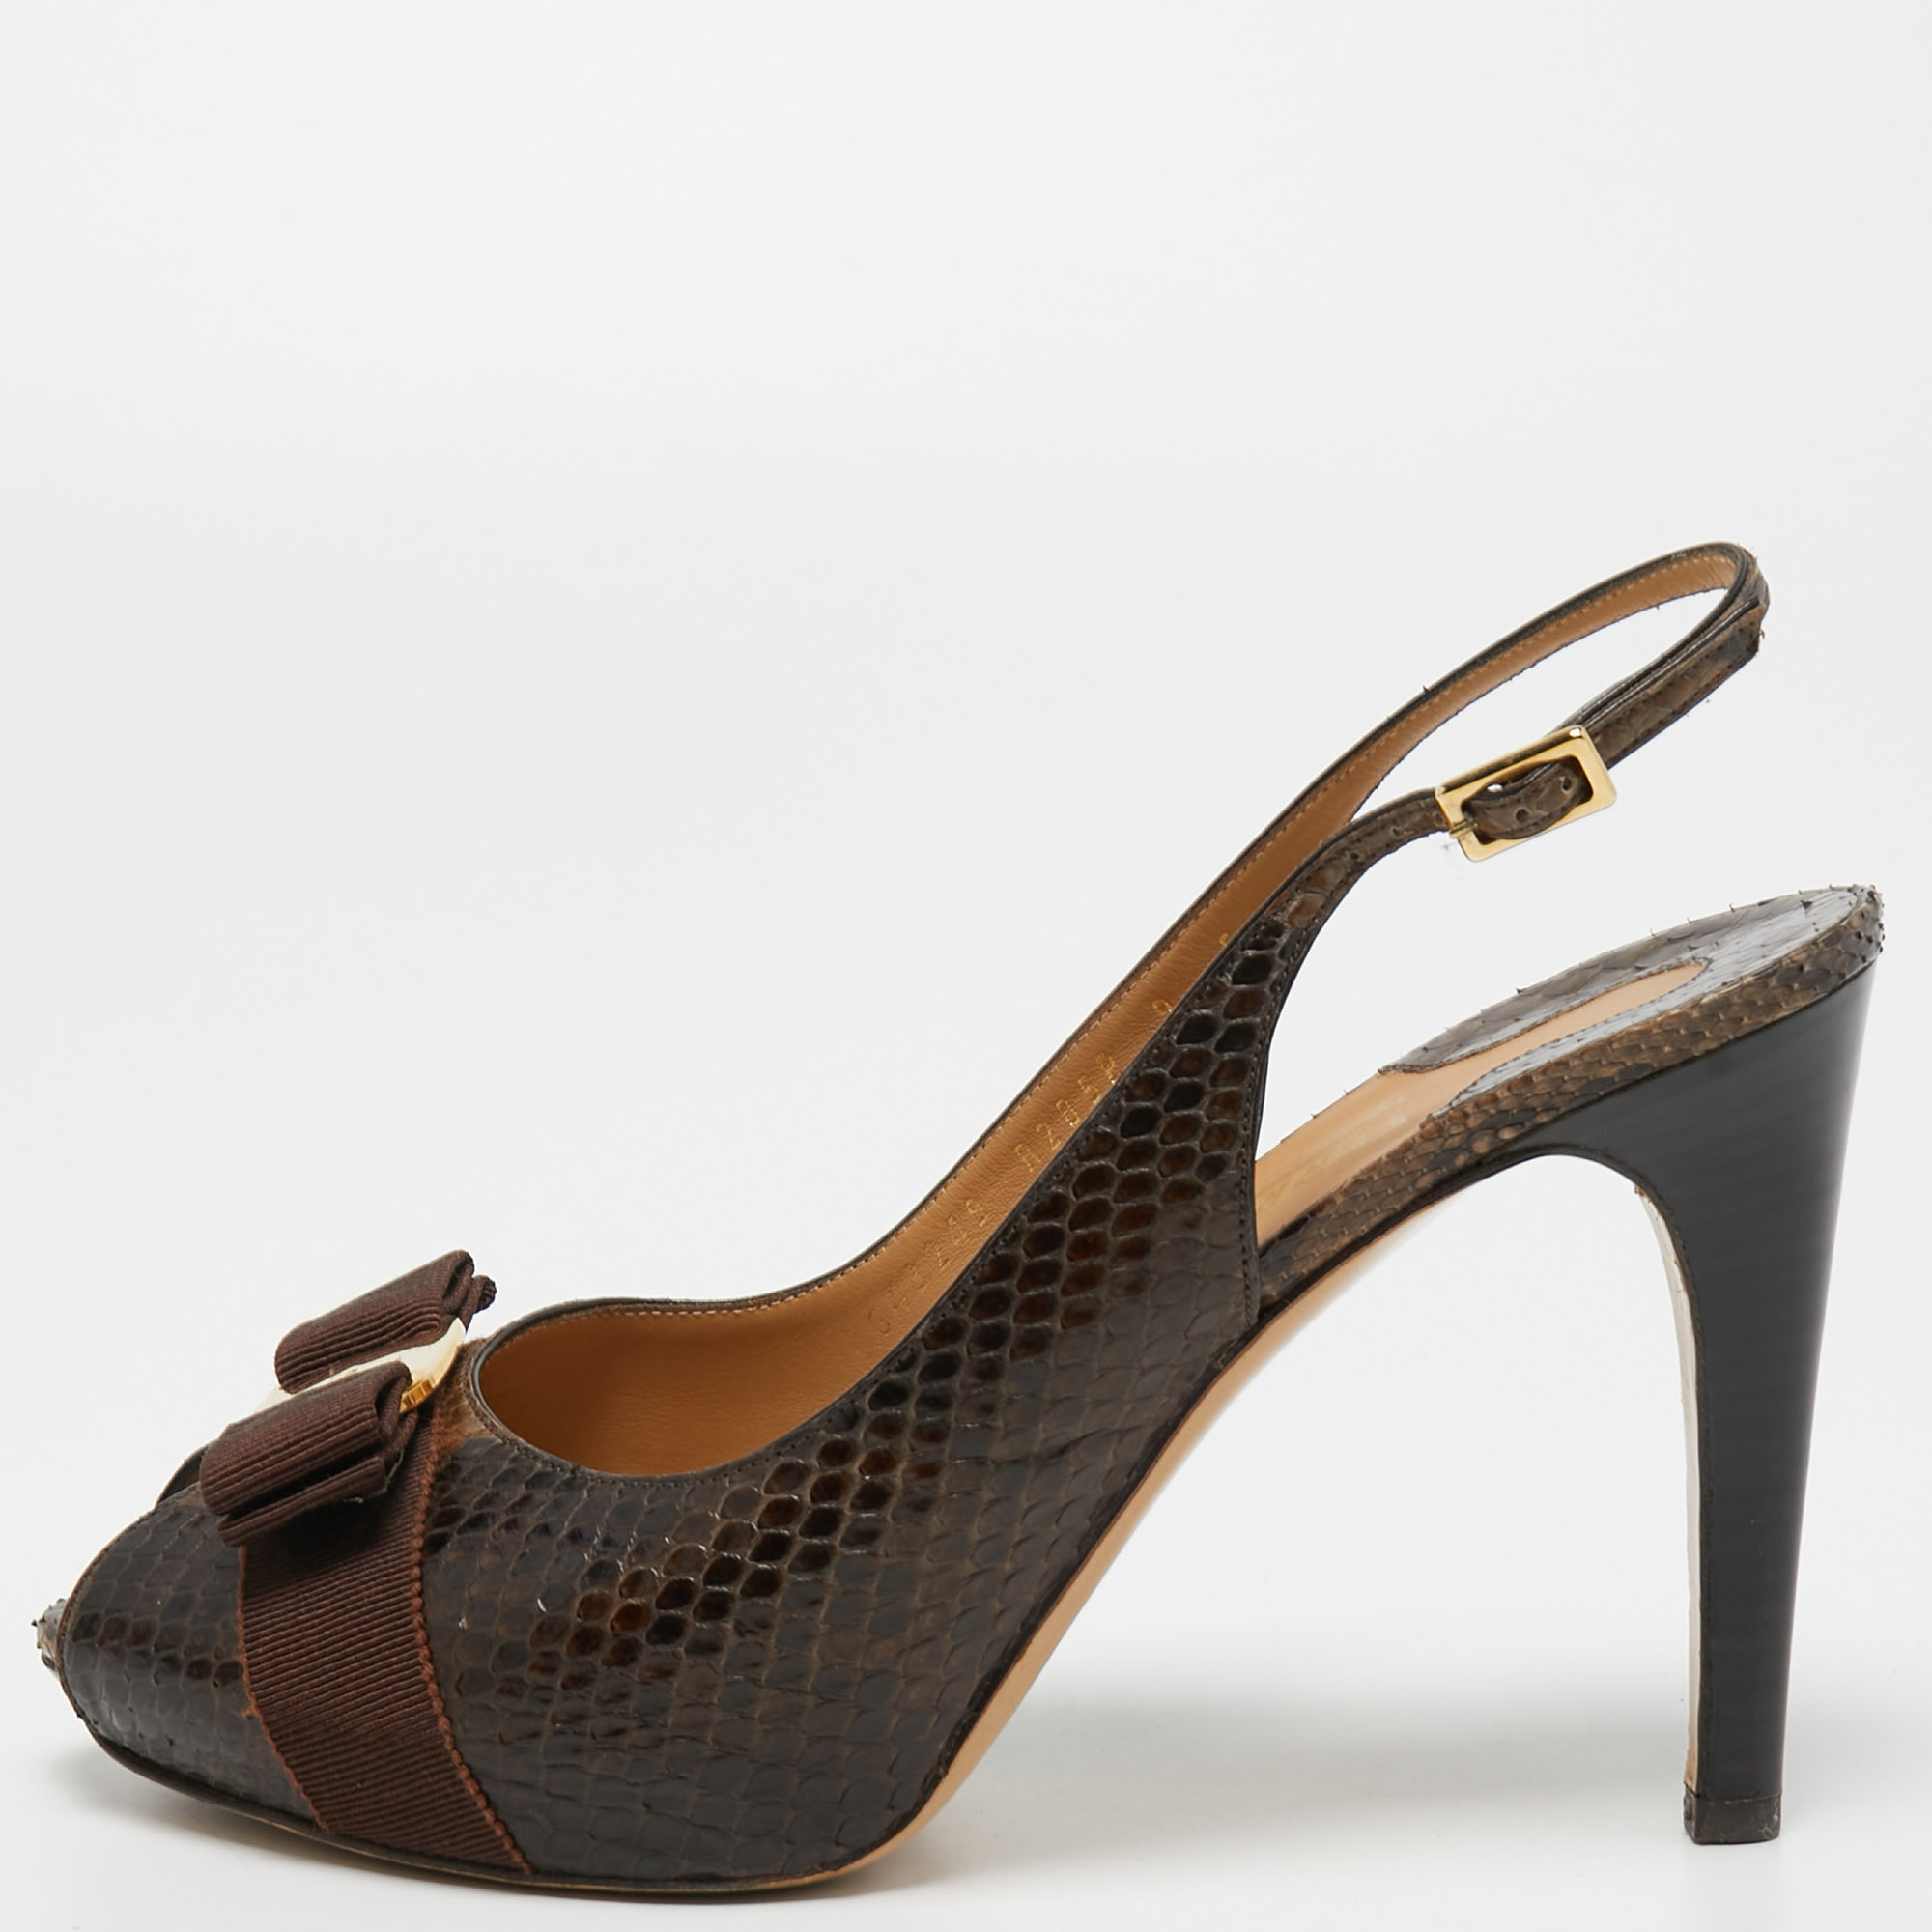 Pre-owned Ferragamo Brown Python Leather Vara Bow Slingback Pumps Size 39.5